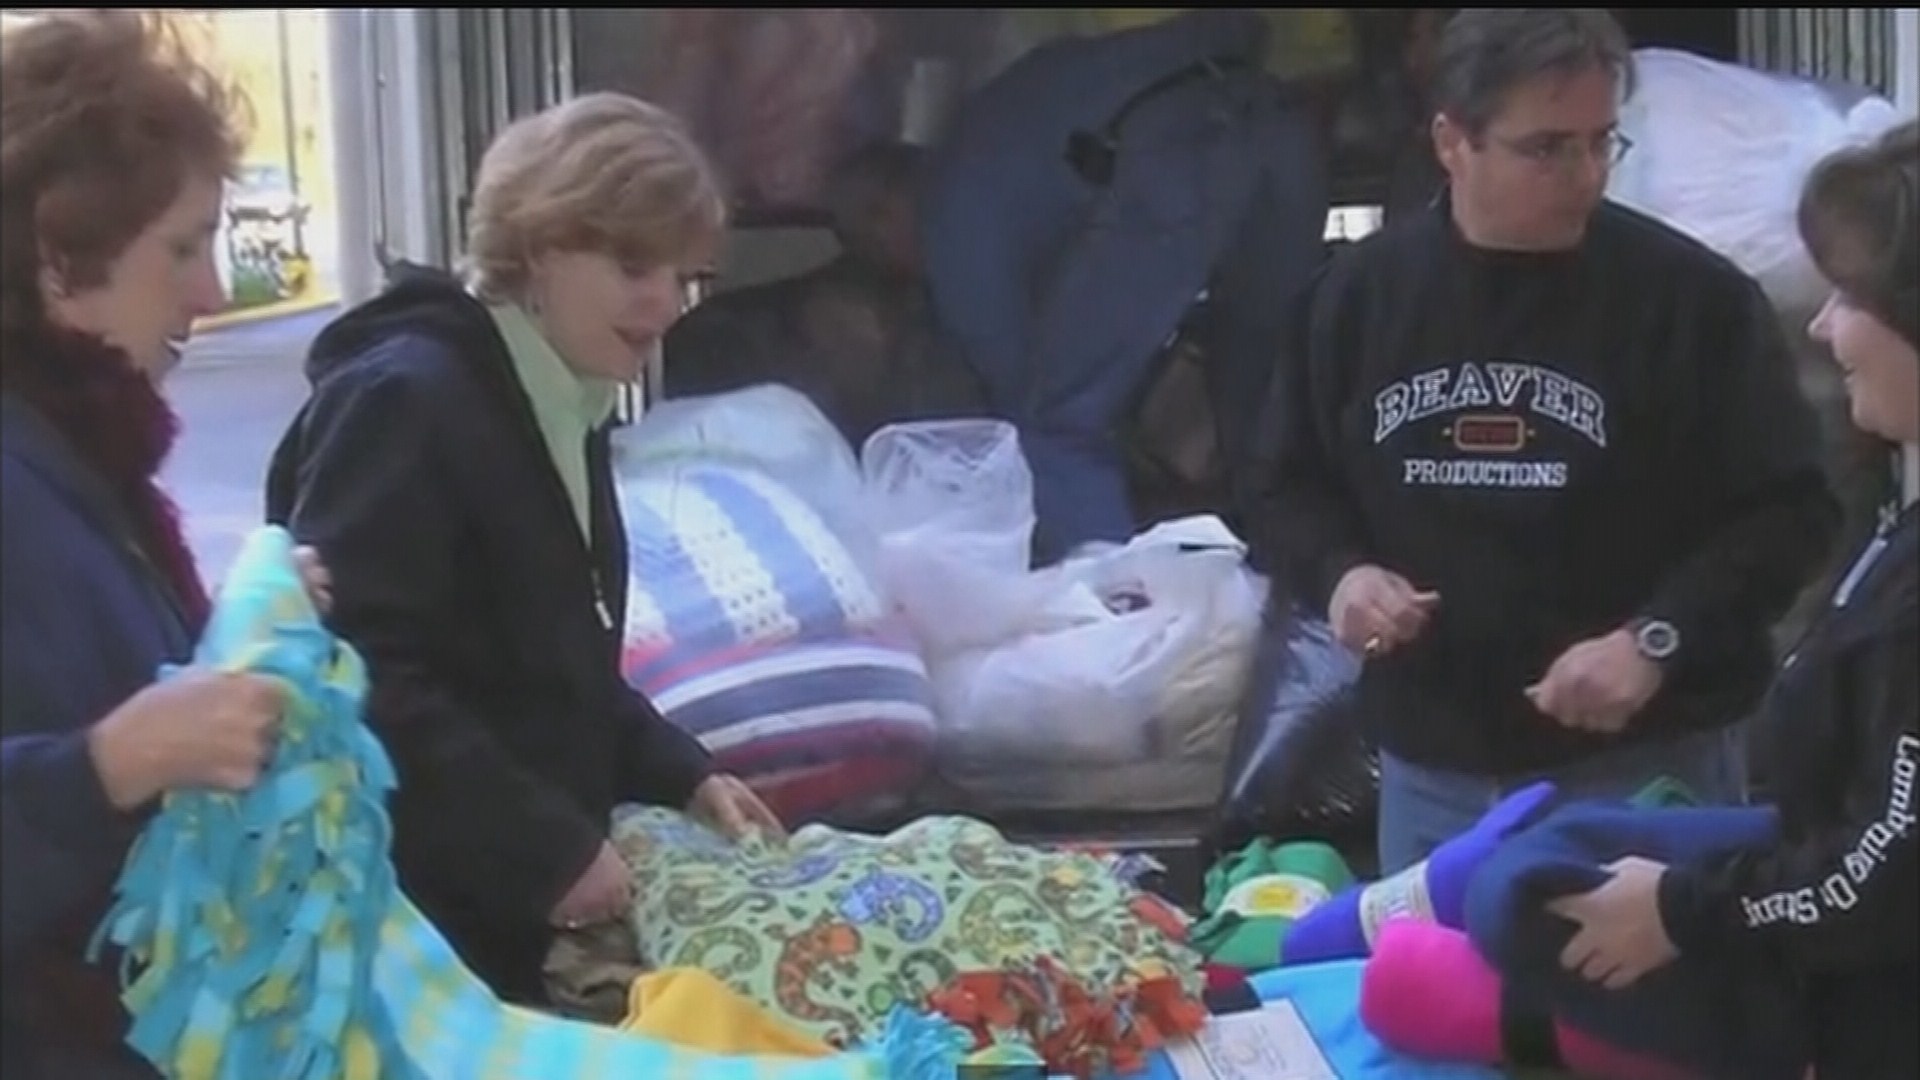 Blanket Louisville to distribute thousands of blankets to the homeless